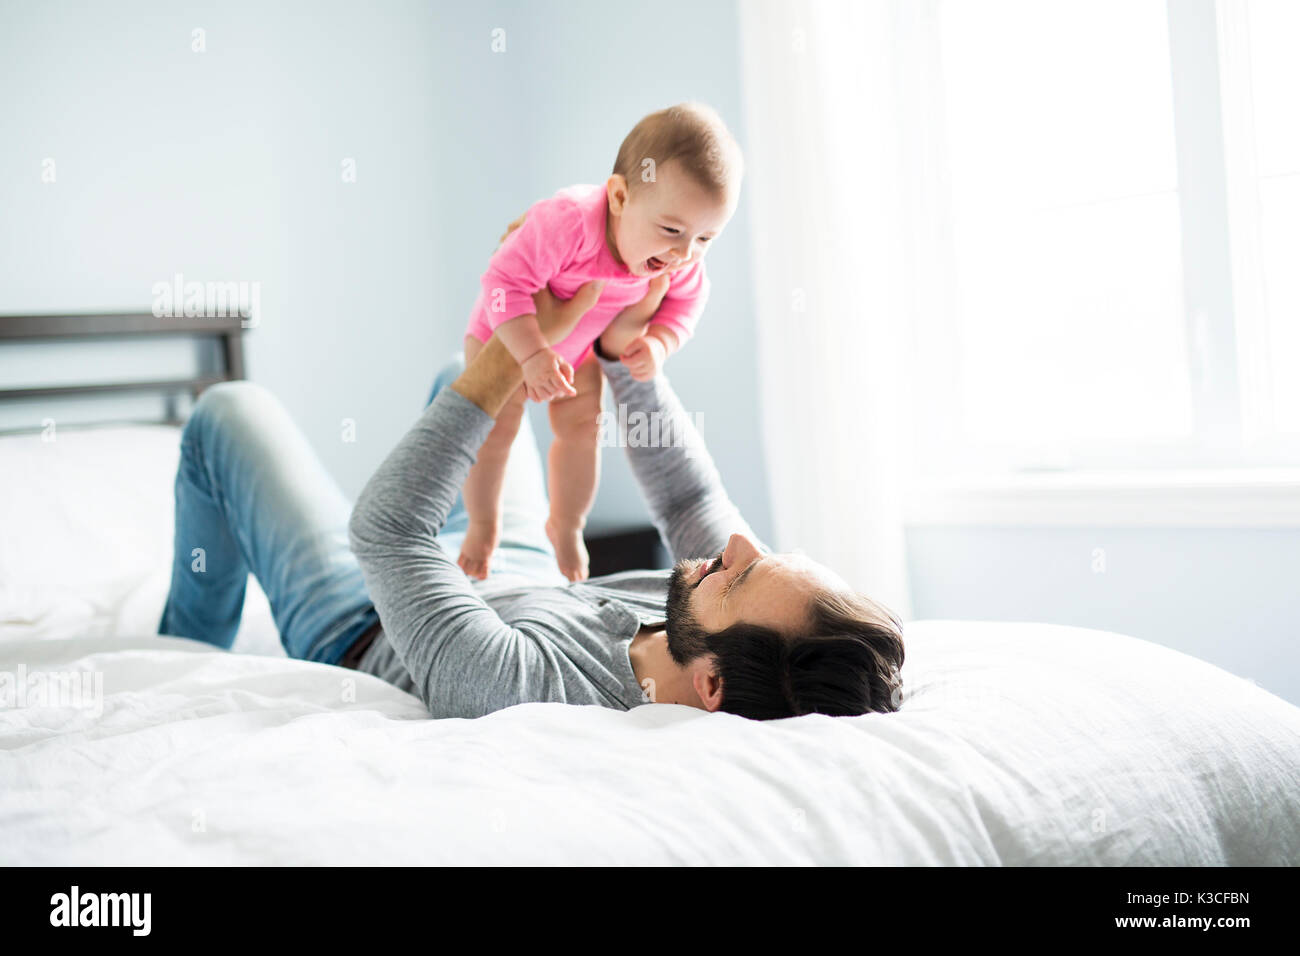 happy father playing with adorable baby in bedroom Stock Photo